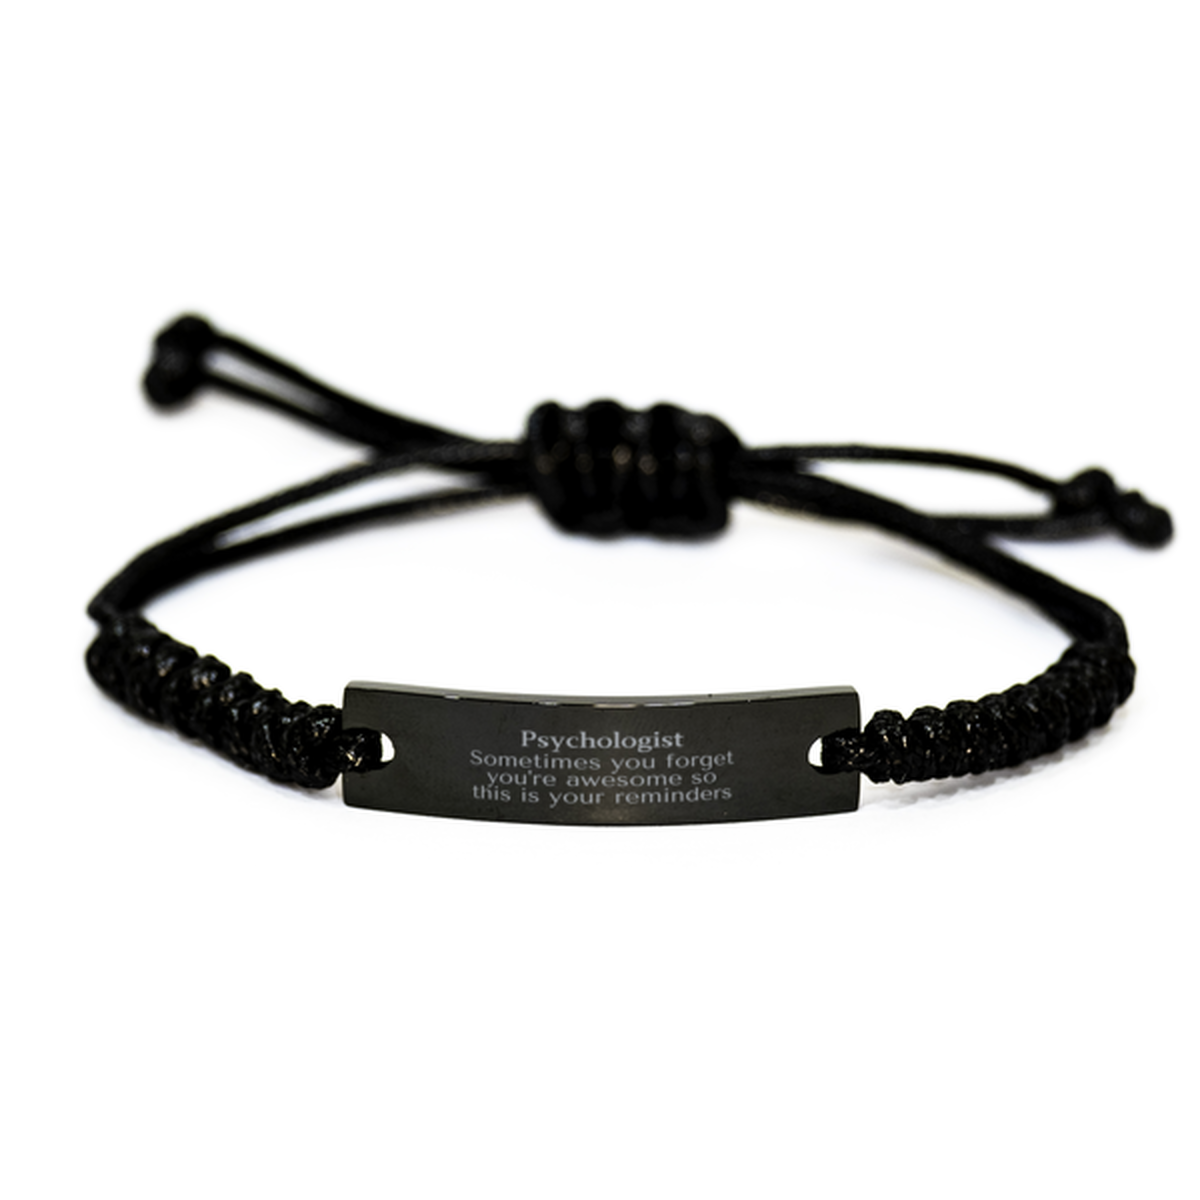 Sentimental Psychologist Black Rope Bracelet, Psychologist Sometimes you forget you're awesome so this is your reminders, Graduation Christmas Birthday Gifts for Psychologist, Men, Women, Coworkers